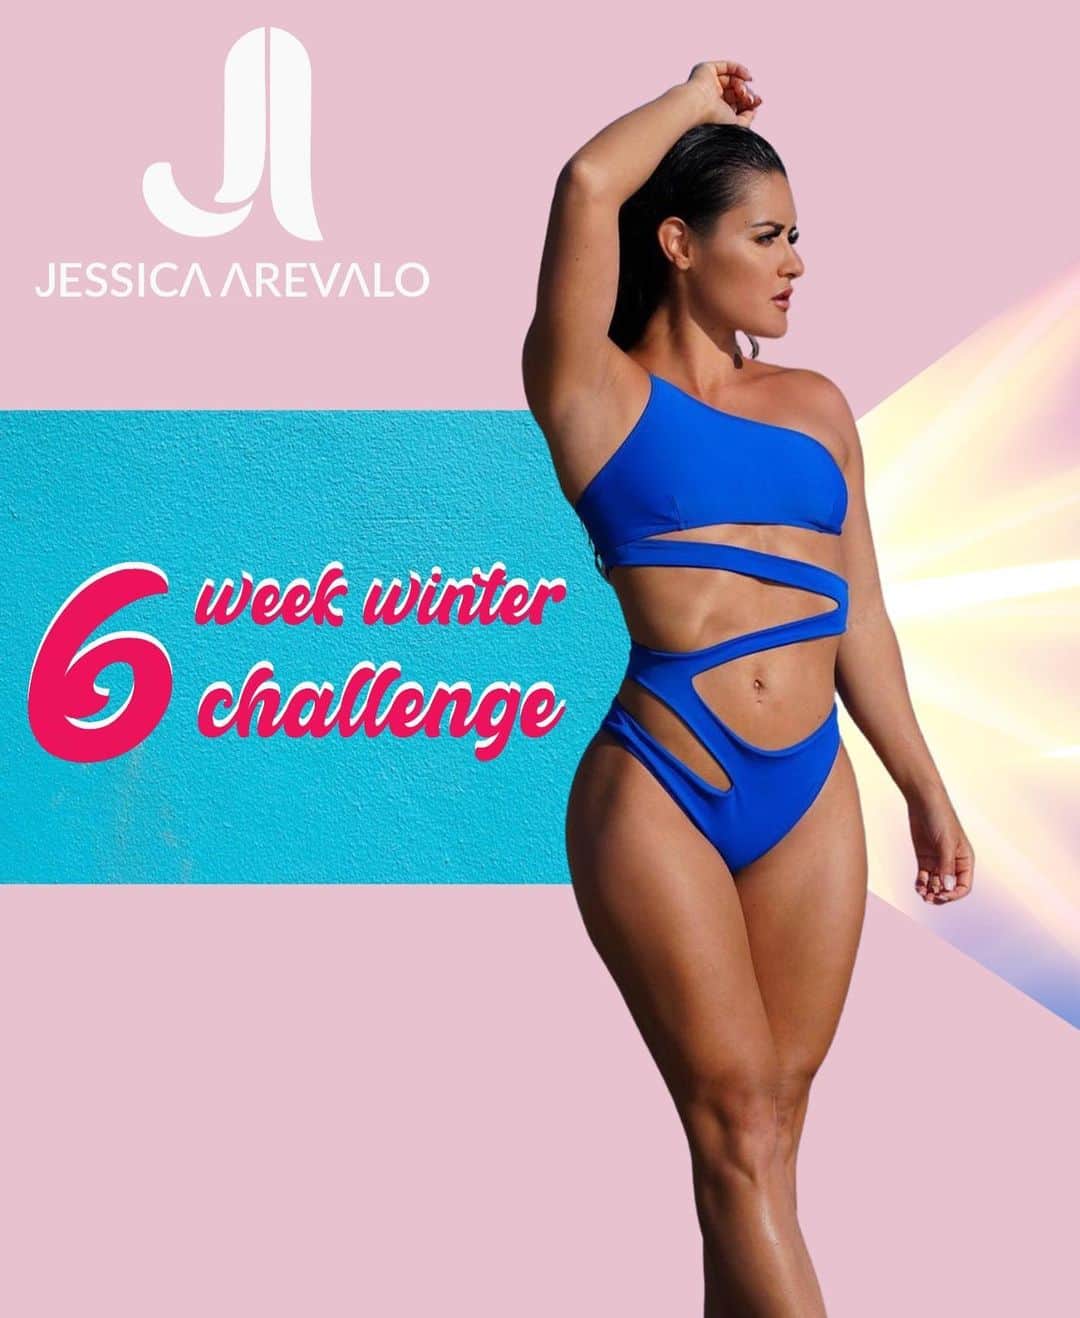 Jessica Arevaloのインスタグラム：「ONLY 9 DAYS LEFT TO SIGN UP! MY 6 WEEK WINTER CHALLENGE IS NOW LIVE!😍  💥IF YOU ARE LOOKING TO TONE UP, LOSE FAT OR LEARN MY WAYS THIS CHALLENGE IS FOR YOU!💥 - Open enrollment is through Dec 13 & the challenge starts Dec 14! DON’T WAIT!🙌🏼 - 🔺My 6 Week Winter is challenge is just $99!!!  🔺This program includes: - 🔺BOTH GYM/HOME WORKOUTS  - 🔺Over $6k in cash prizes - 🔺One on One Coaching with me - 🔺Weekly Check ins - 🔺Workout Program +Macros/Meal Plans + Cardio Regimen  - 🔺Private Facebook Group and more! - 🔺WORLDWIDE ENTRY  - 🔺 FOR WOMEN & MEN  - CHECK OUT LINK IN BIO TO SIGN UP!👆🏼If you have any question please feel free to DM me directly!📩」